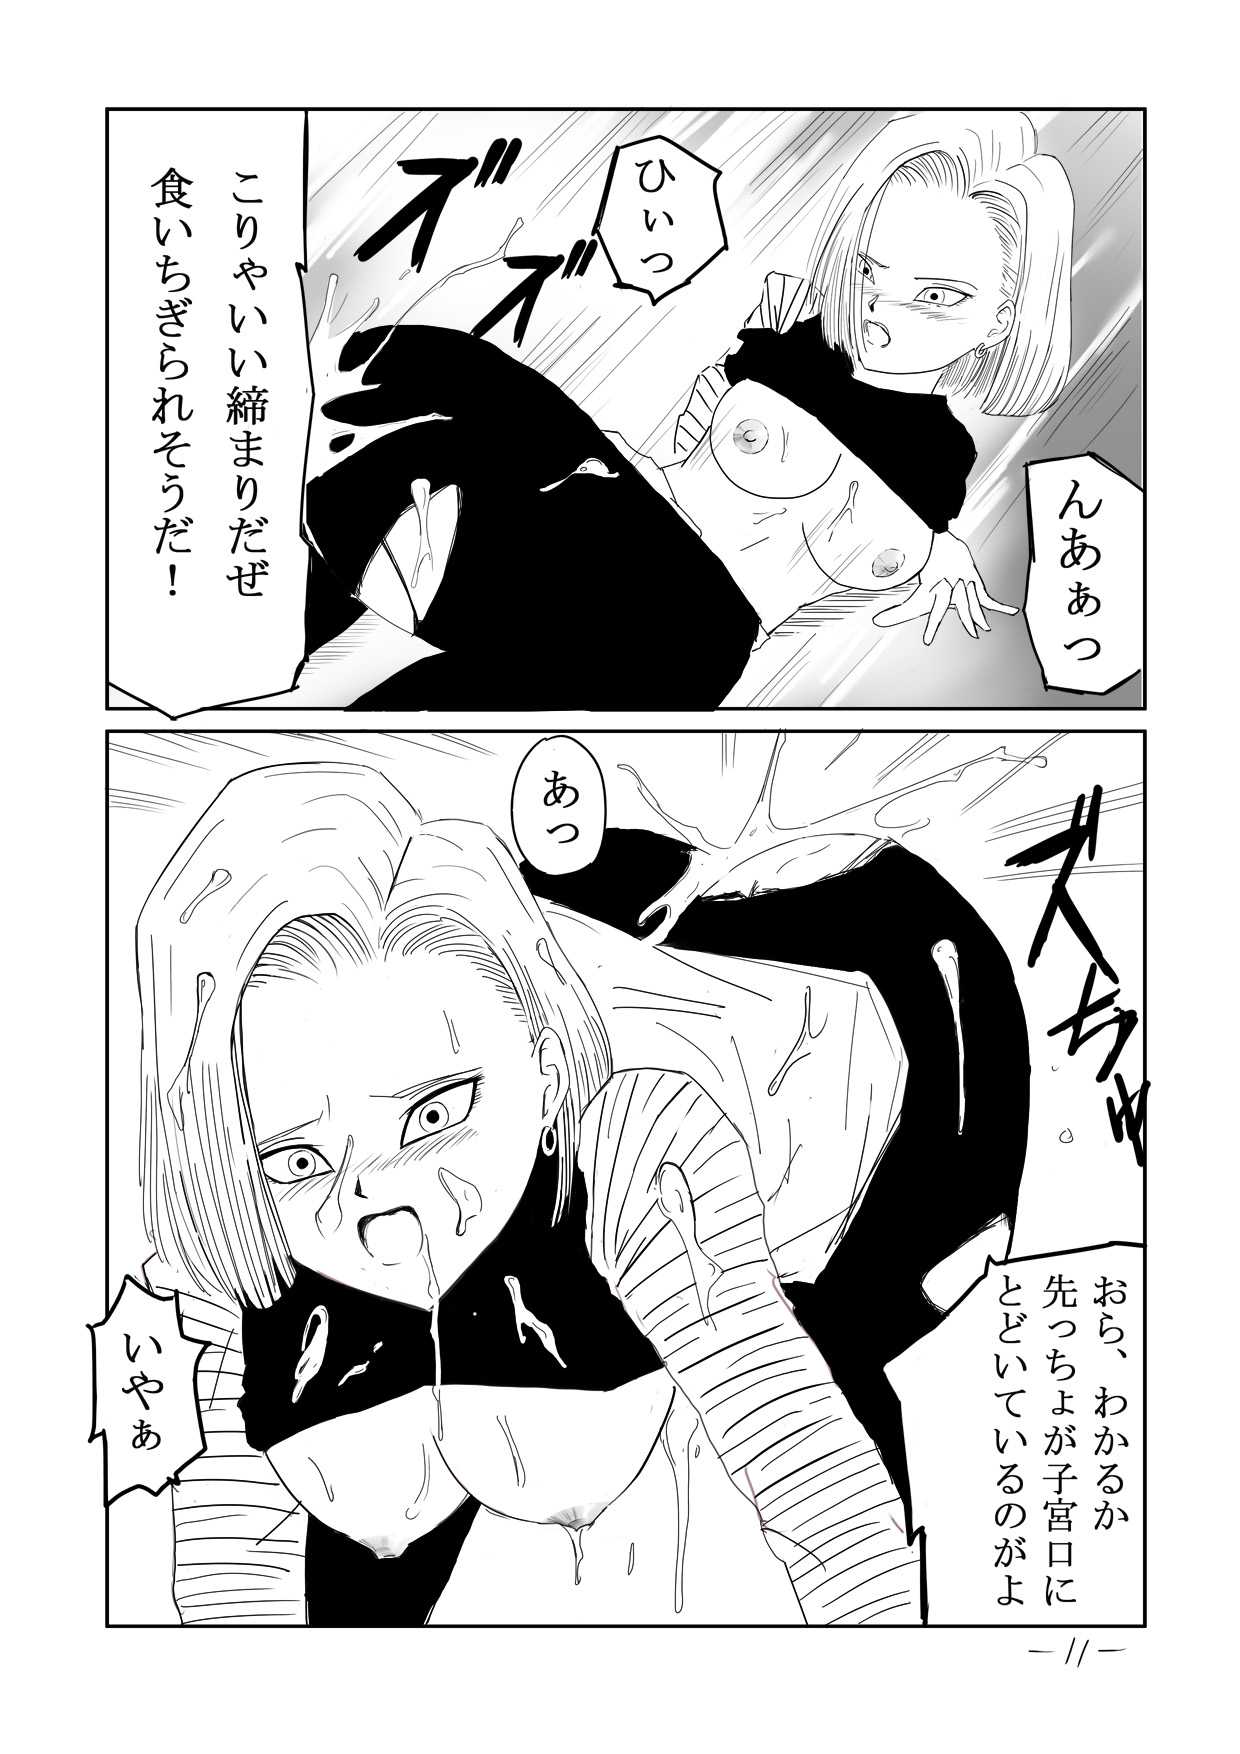 [Cat&#039;s Claw] Sexual Desire Treatment Android 18 (Dragon Ball Z) [Cat&#039;s Claw] 性処理人形 ○8号 (ドラゴンボールZ)